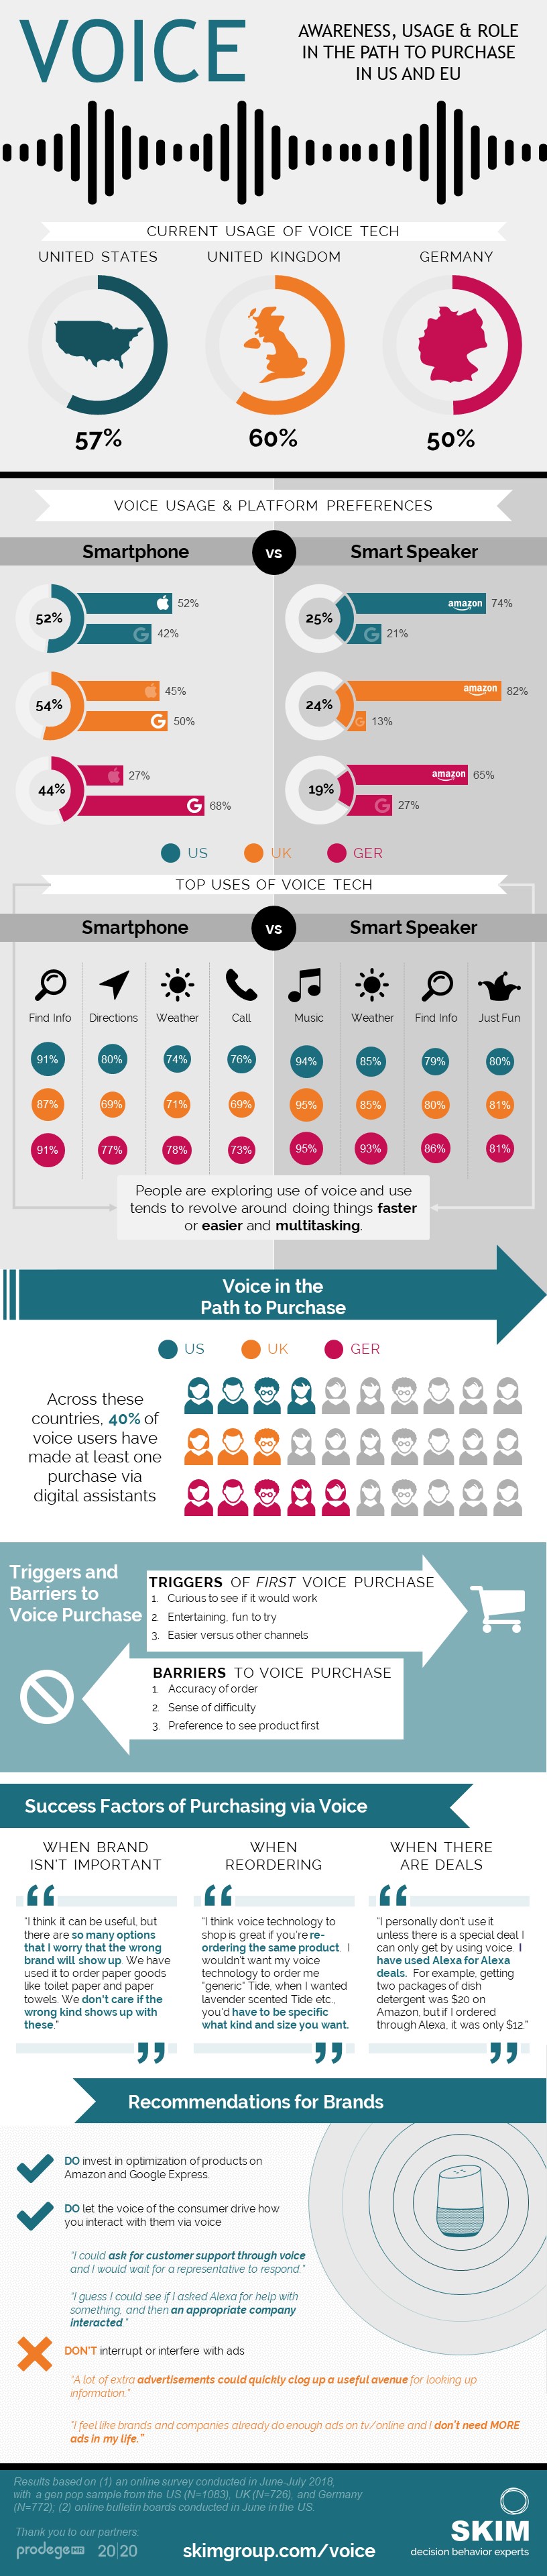 INFOGRAPHIC_SKIM Research 2018_Voice Awareness and Usage in US and EU